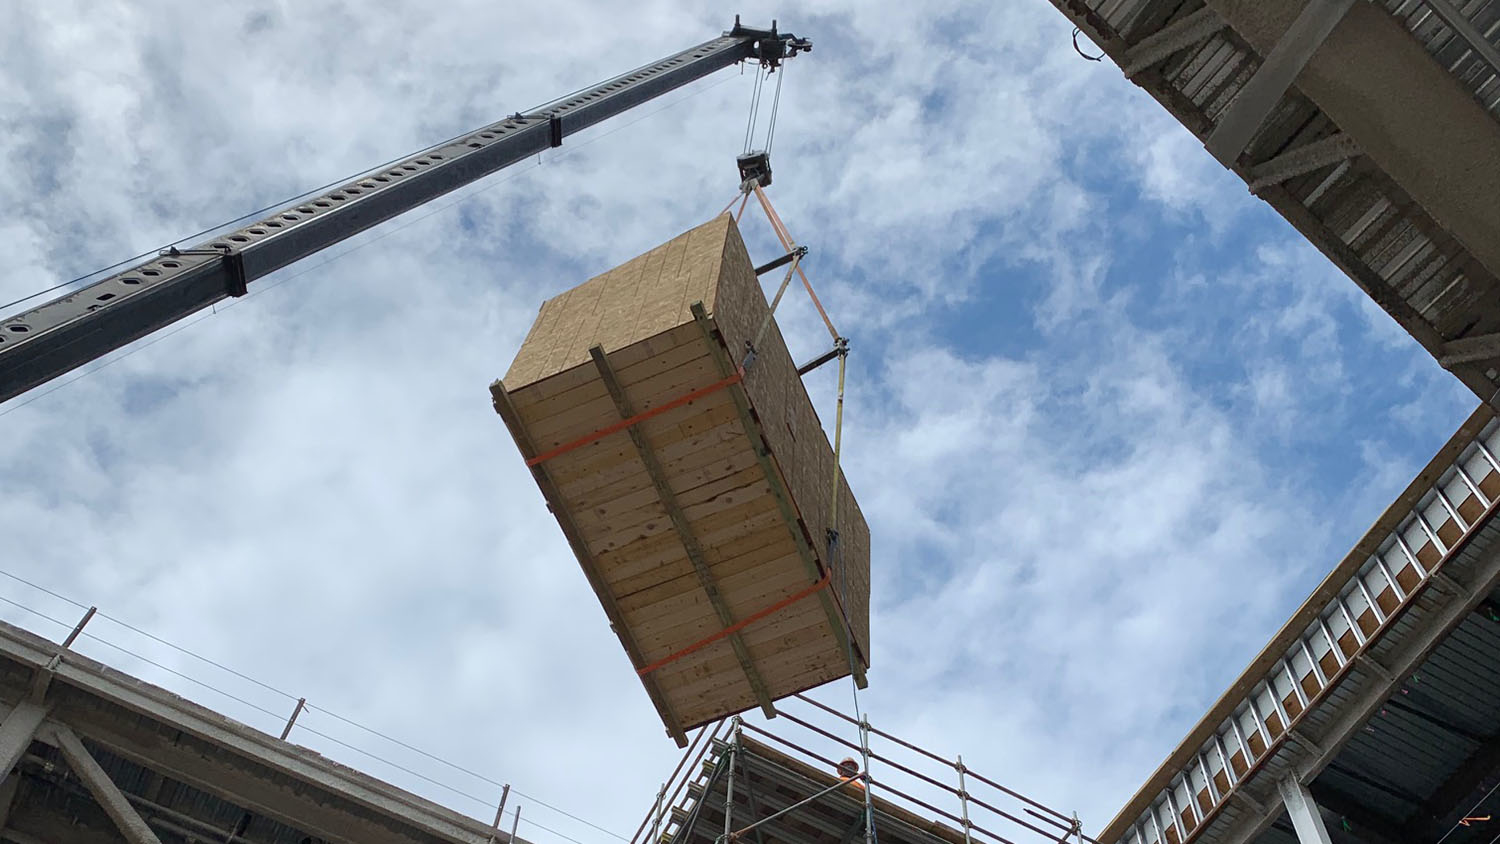 A wooden crate being hoisted by a crane into a building with a blue sky.